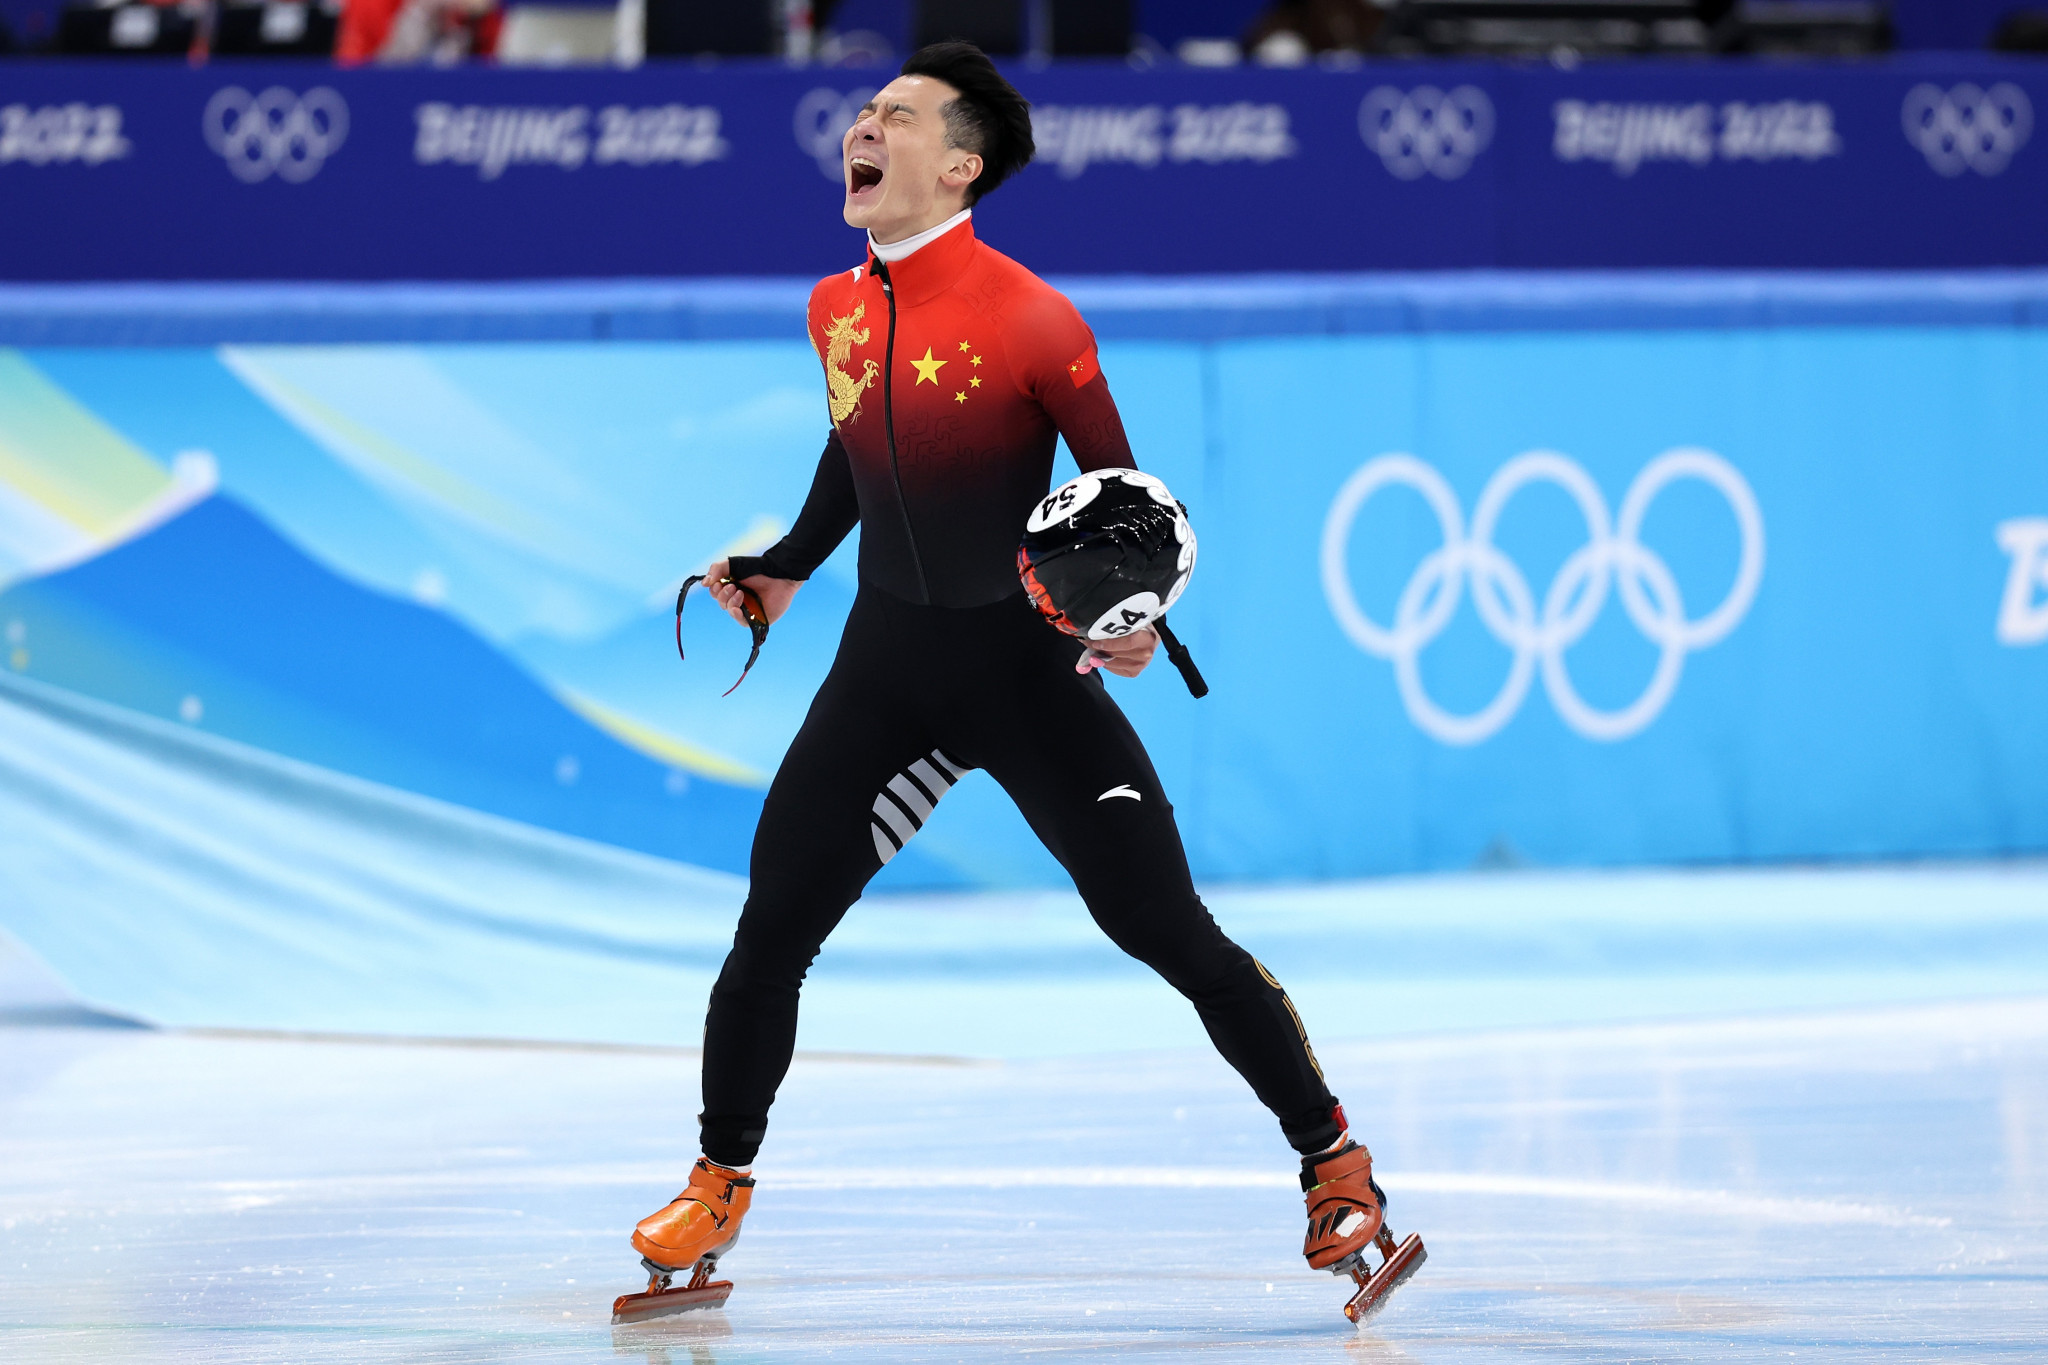 Short track speed skater Ren Ziwei claimed two golds as China enjoyed its best-ever performance at a Winter Olympics ©Getty Images